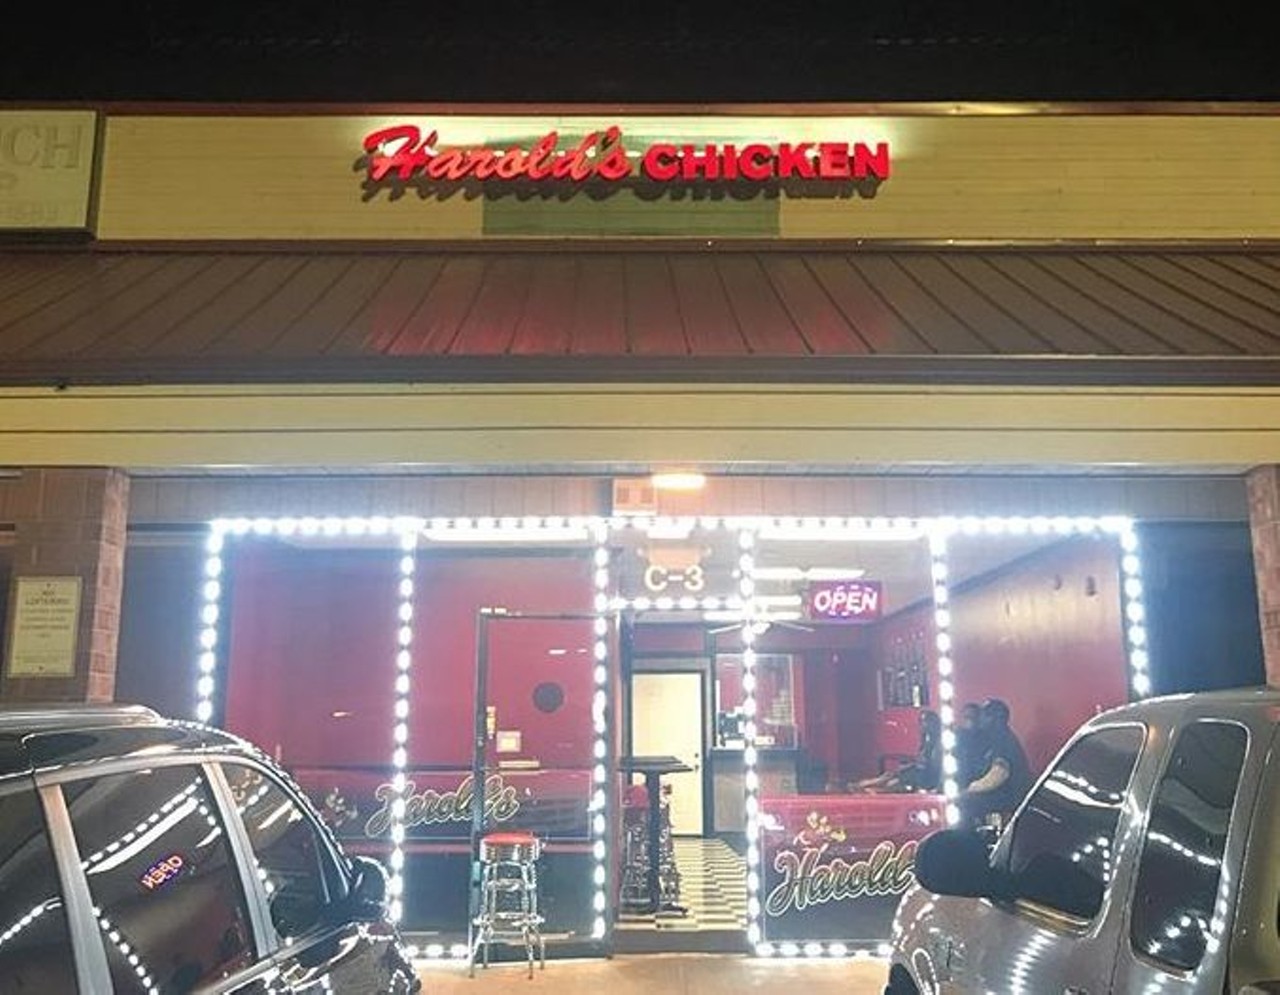 Harold's Chicken Shack
In "Fredo Santana&#146;s Jealous," rapper Kendrick Lamar sings that he flew his private jet straight from Rome to Chicago, all for some sweet, sweet Harold&#146;s chicken. We don&#146;t know if that&#146;s true, but we do know we want that chicken too. 
Photo via Instagram user @logan__harris23